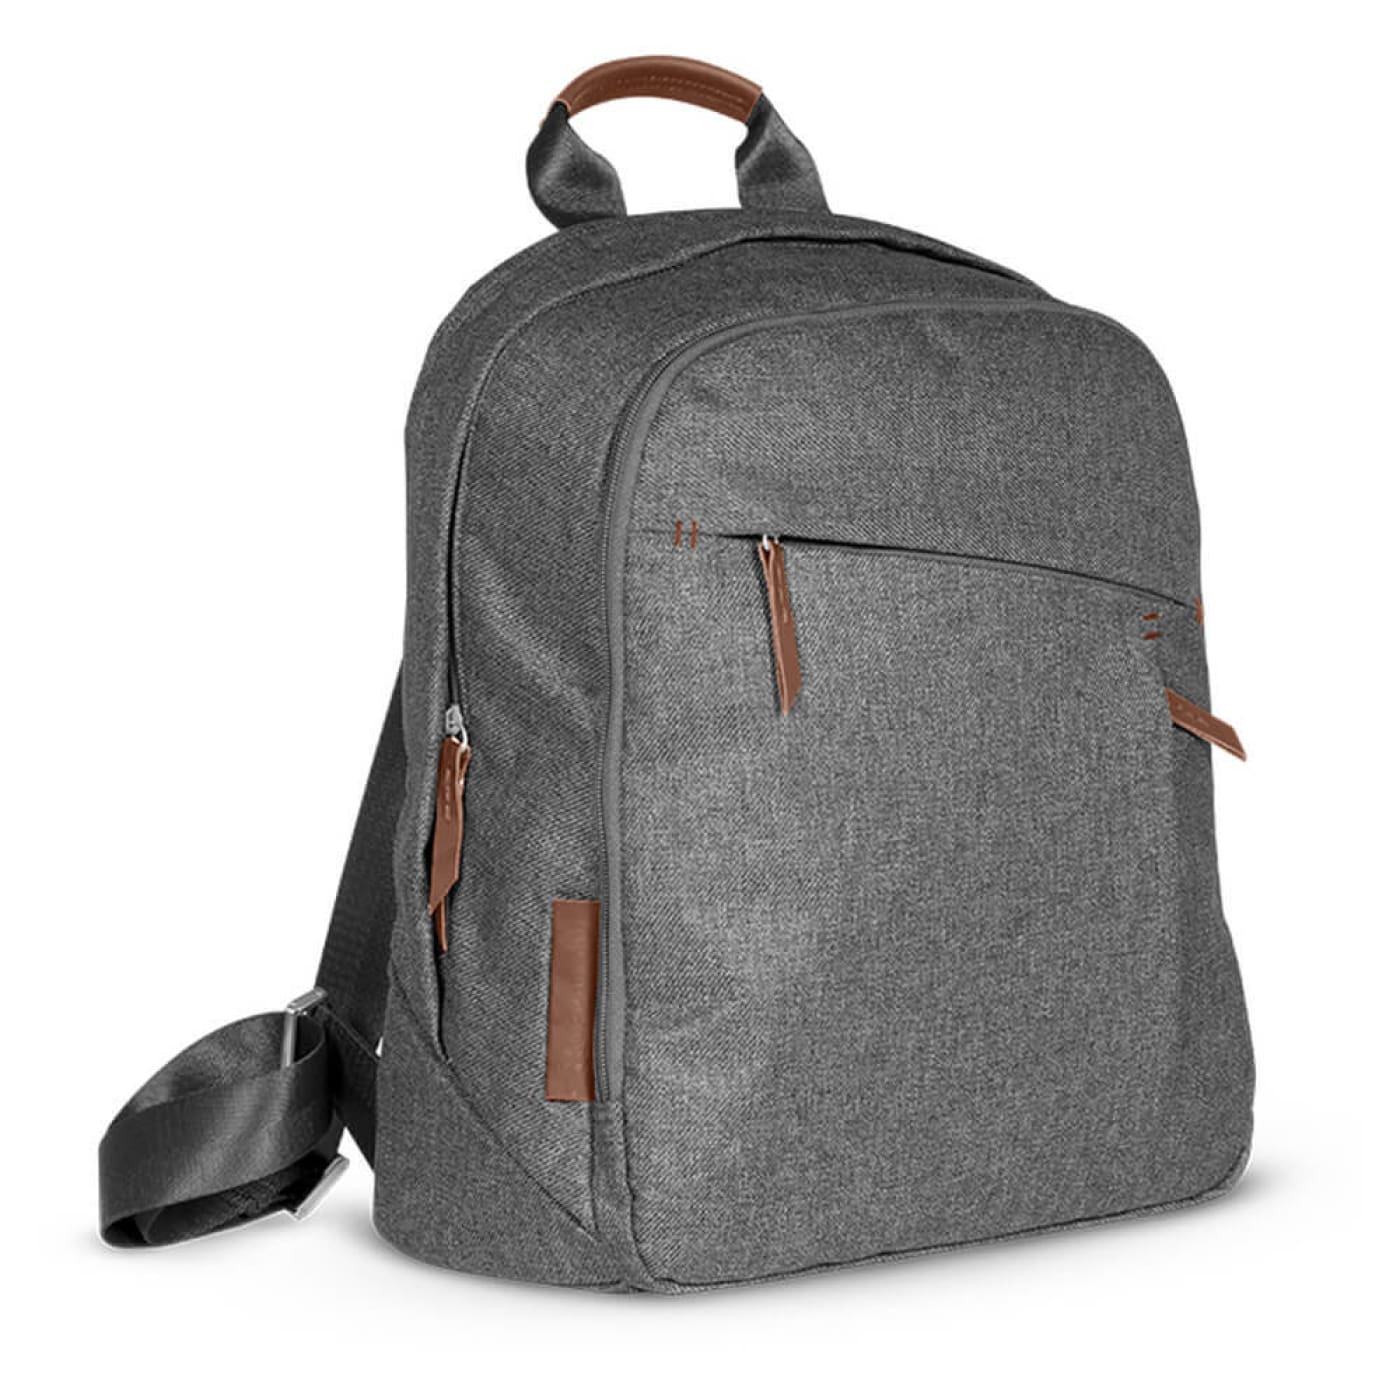 UPPAbaby Changing Backpack - Greyson - Greyson - ON THE GO - NAPPY BAGS/LUGGAGE